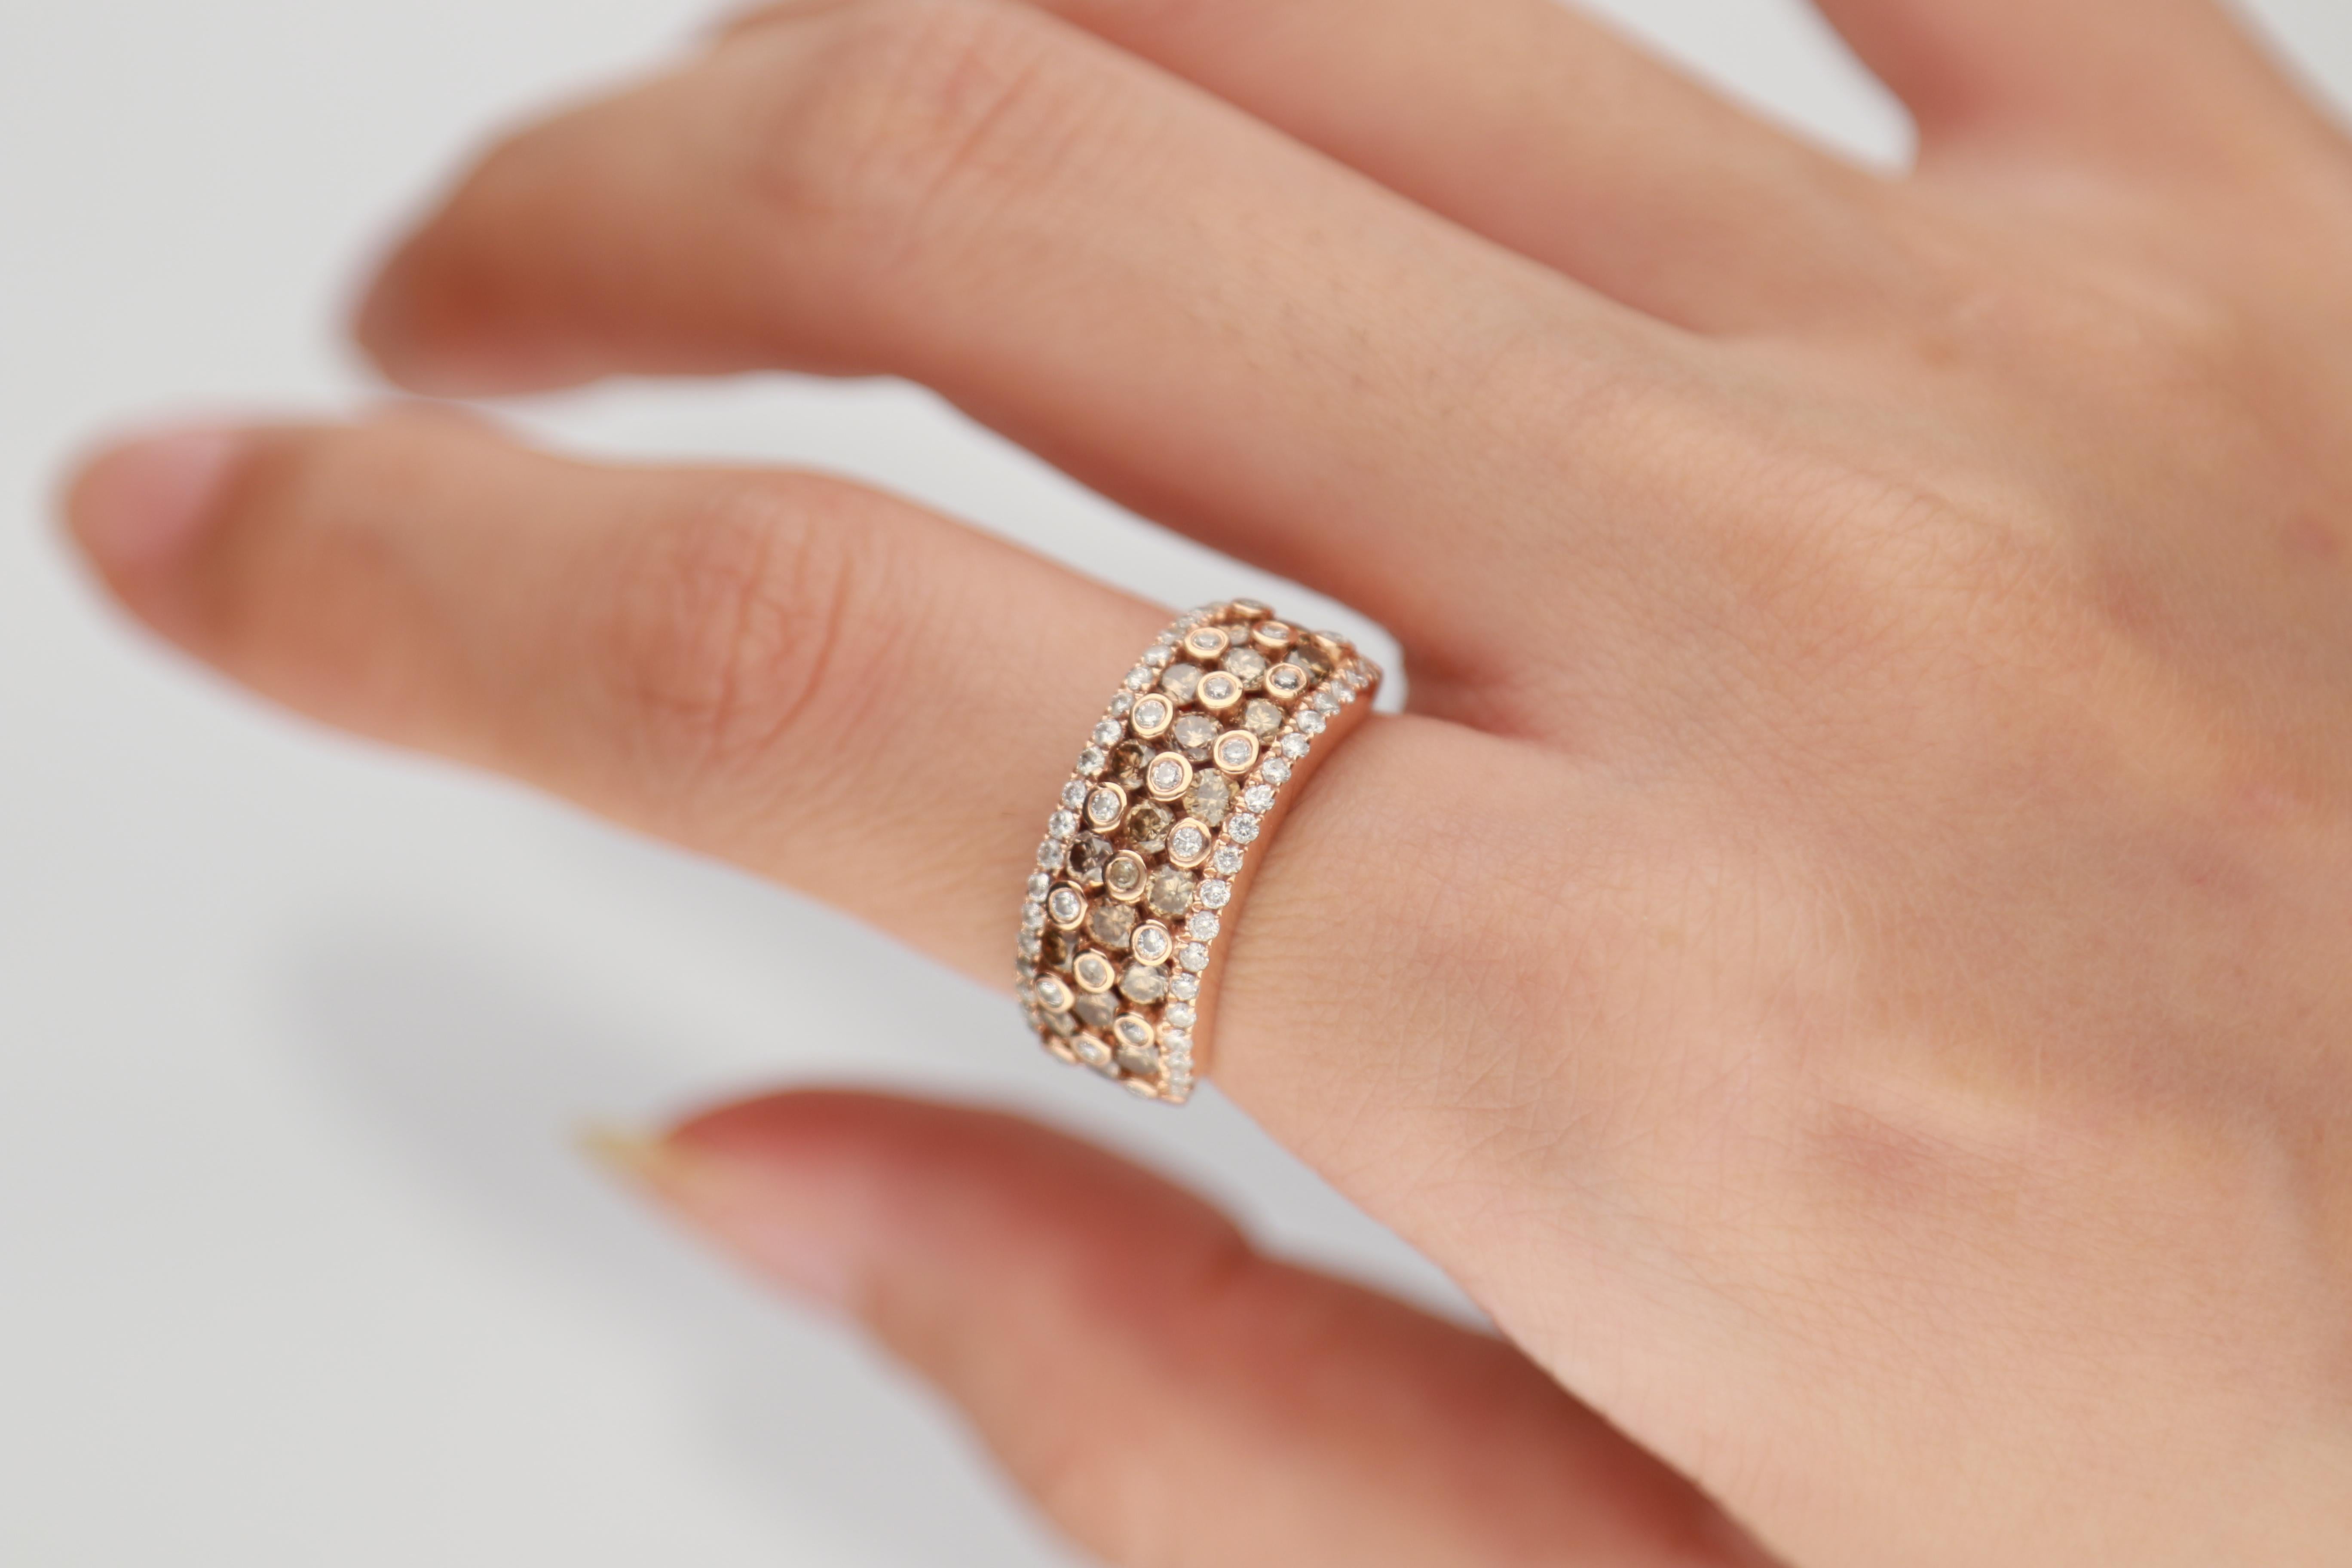 This beautiful Ring is crafted in 14-karat Rose Gold and features an 19 Pcs  1.07 Carat Round Cut Brown Diamond surrounded with 58 Pcs  Round -cut White Diamonds 0.46 Carat in GH-SI quality. 
This ring comes in size 7 and can be resized to 6 & 8. It